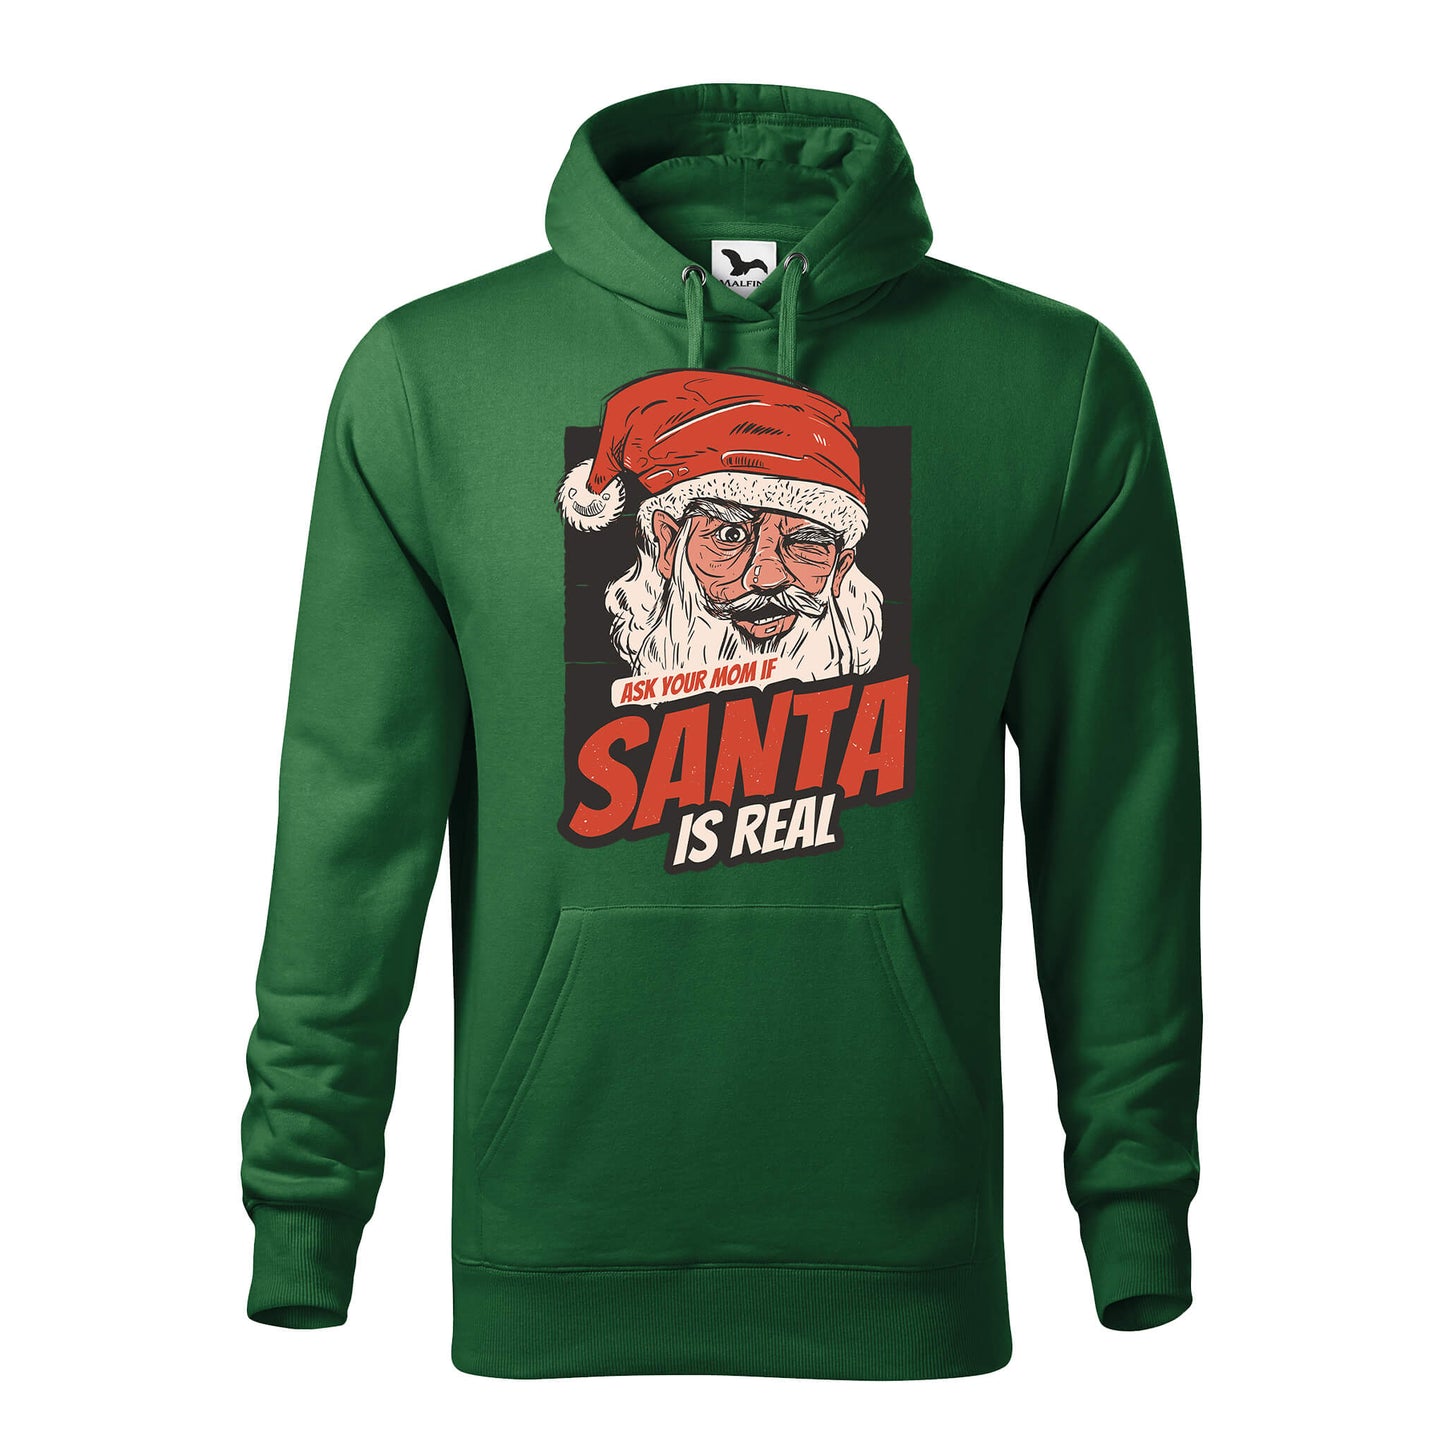 Ask your mom if santa is real hoodie - rvdesignprint